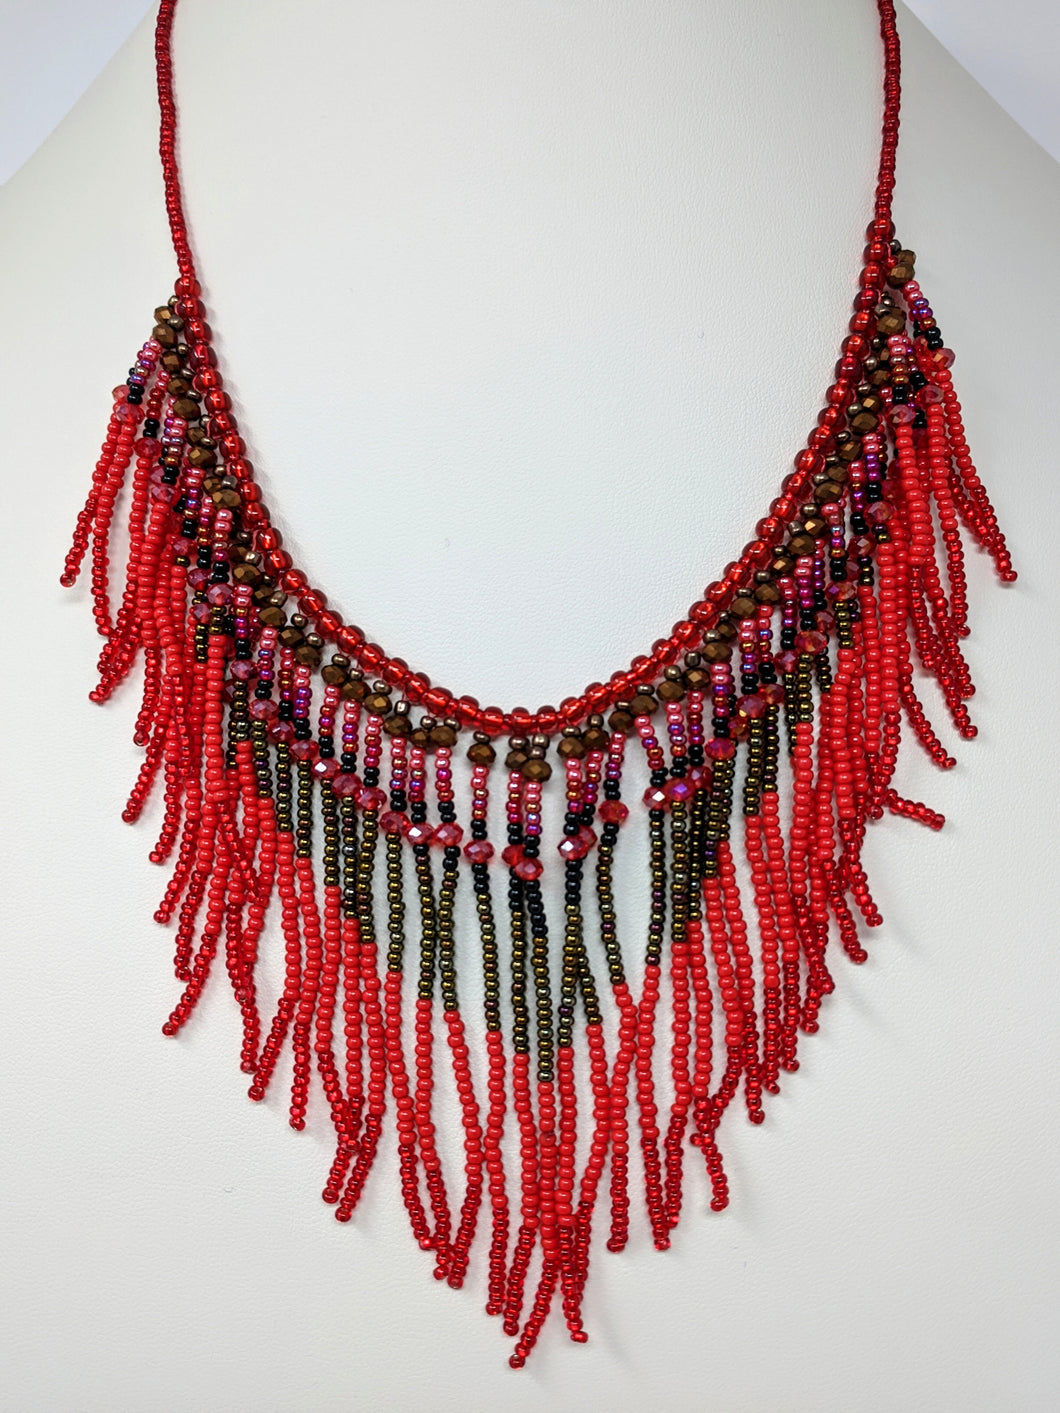 Festive Seed bead necklace